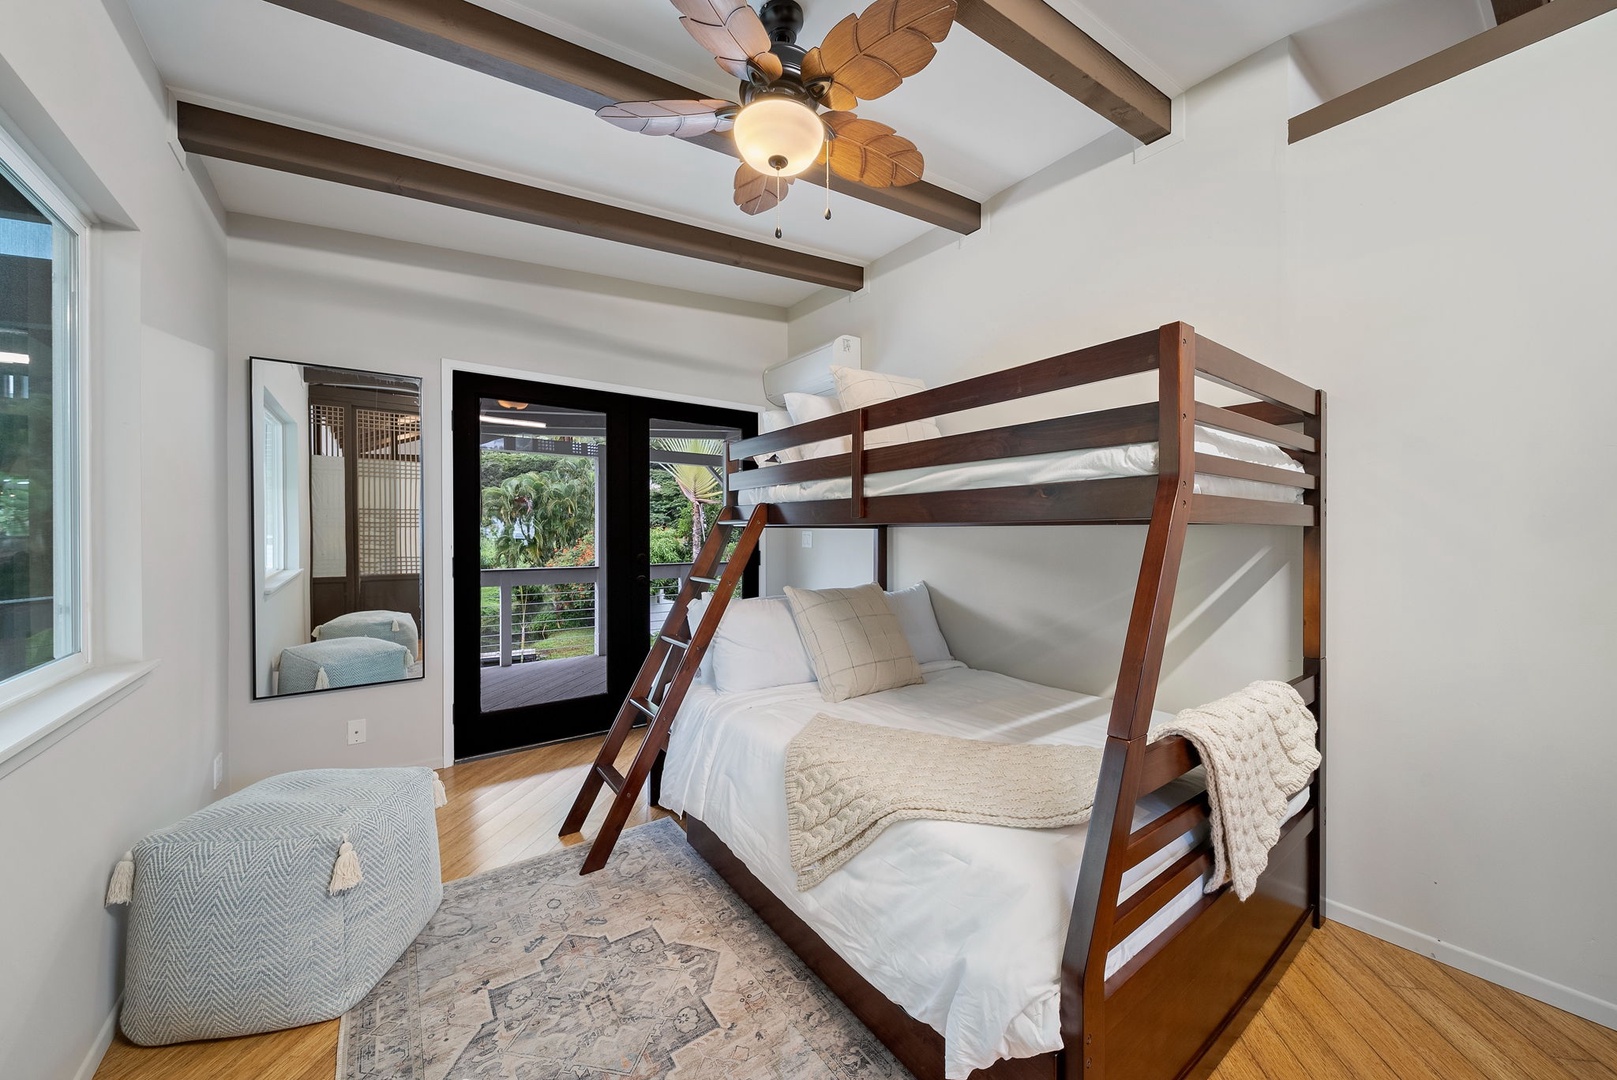 Kaaawa Vacation Rentals, Kualoa Ohia - Comfy Twin over Full Bunk beds with ceiling fan perfect for kids